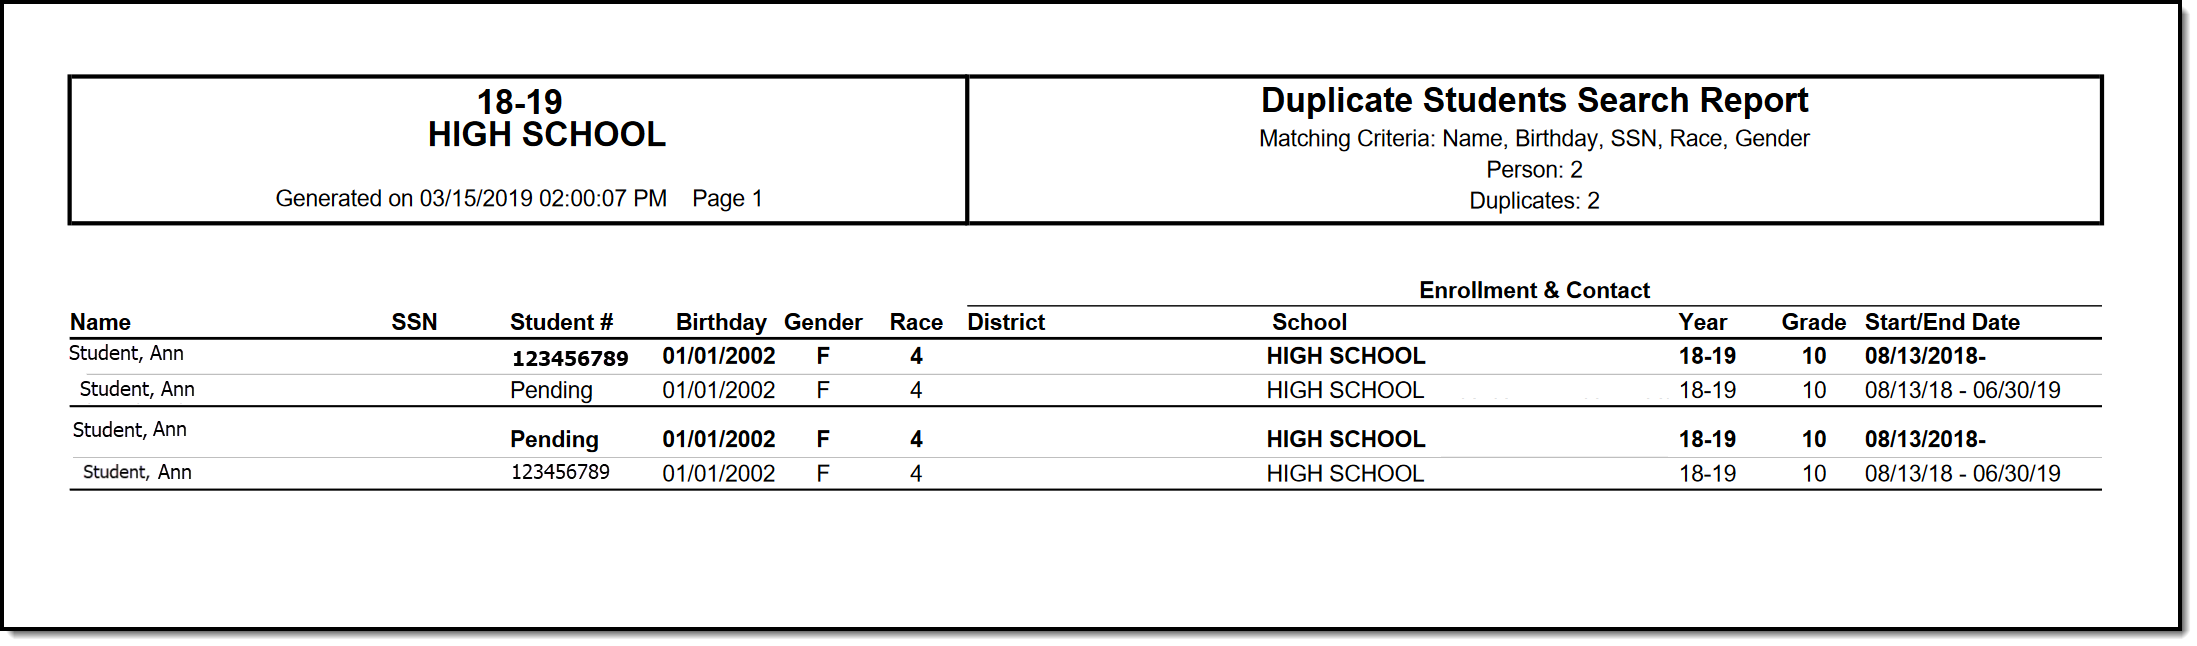 Screenshot of the Duplicate Student Search Report in PDF format. 